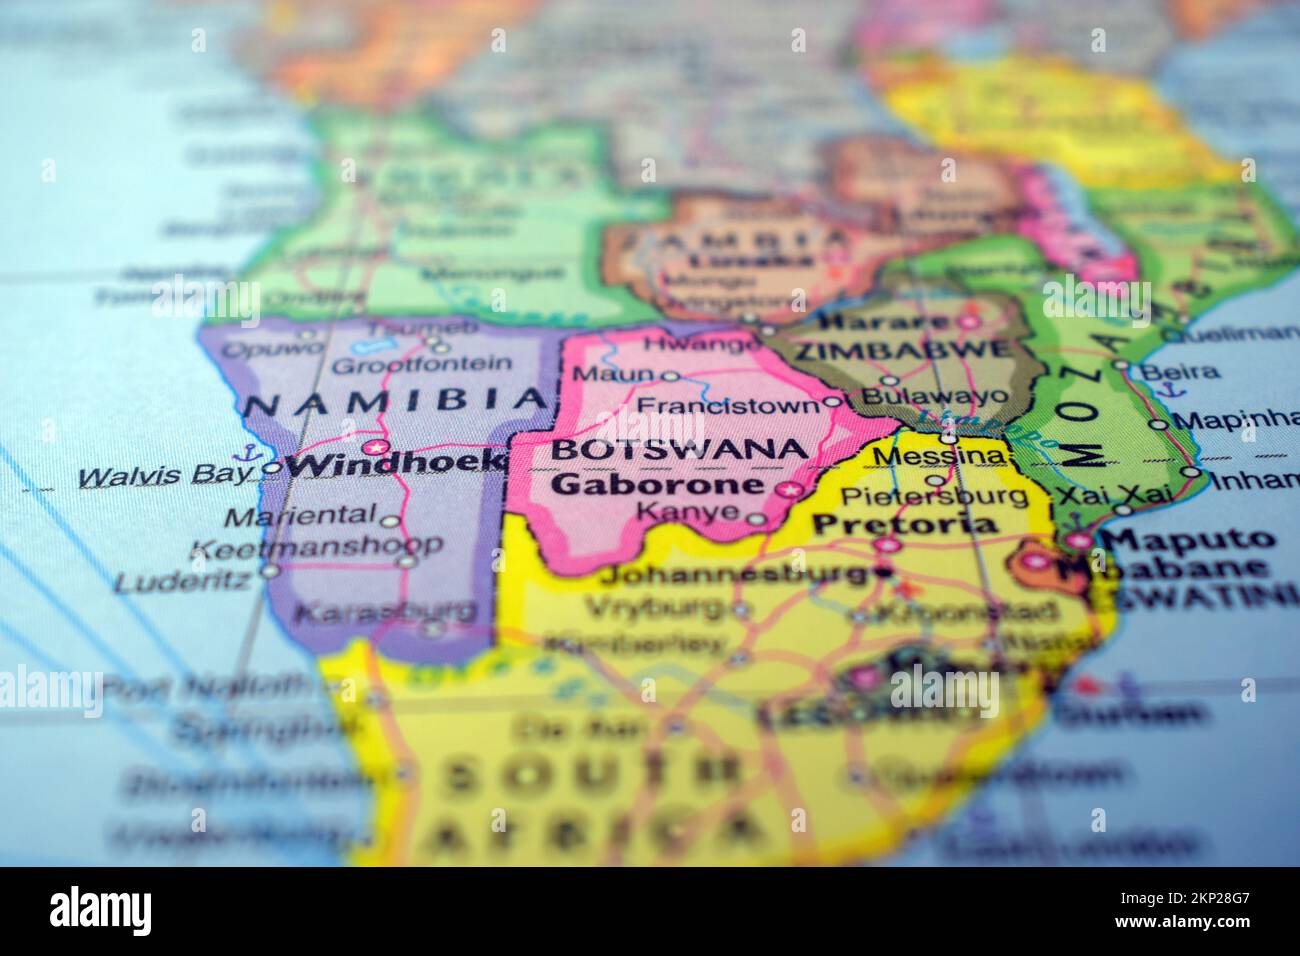 Botswana Travel Concept Country Name On The Political World Map Very Macro Close Up View Stock 6171